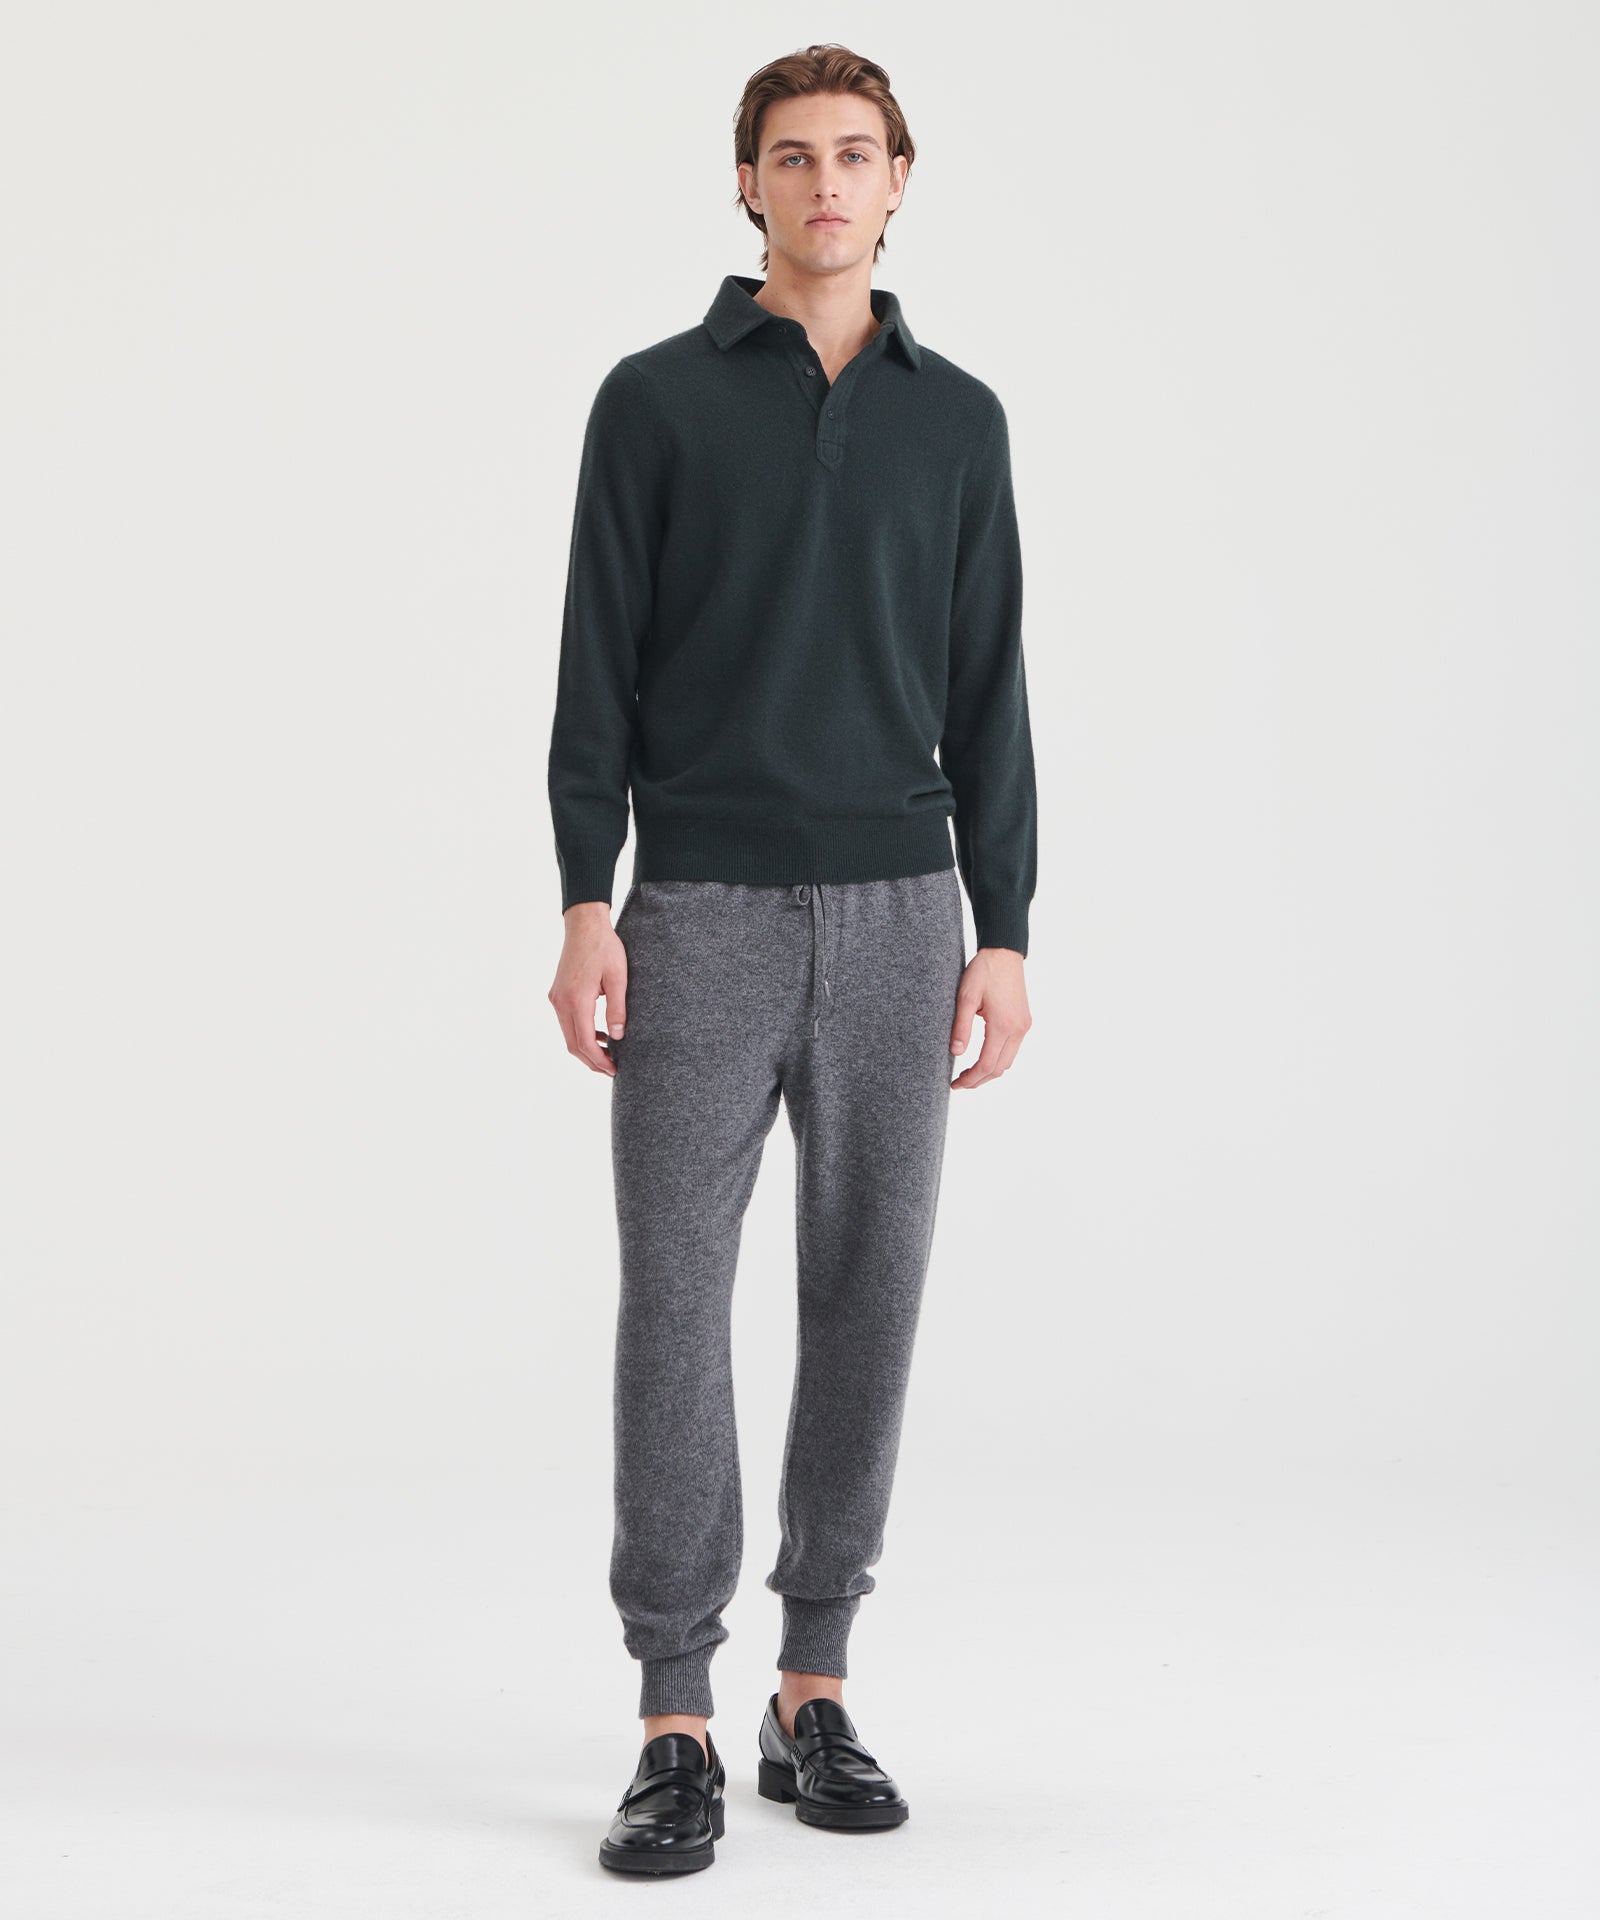 The Best Affordable Cashmere Sweatpants